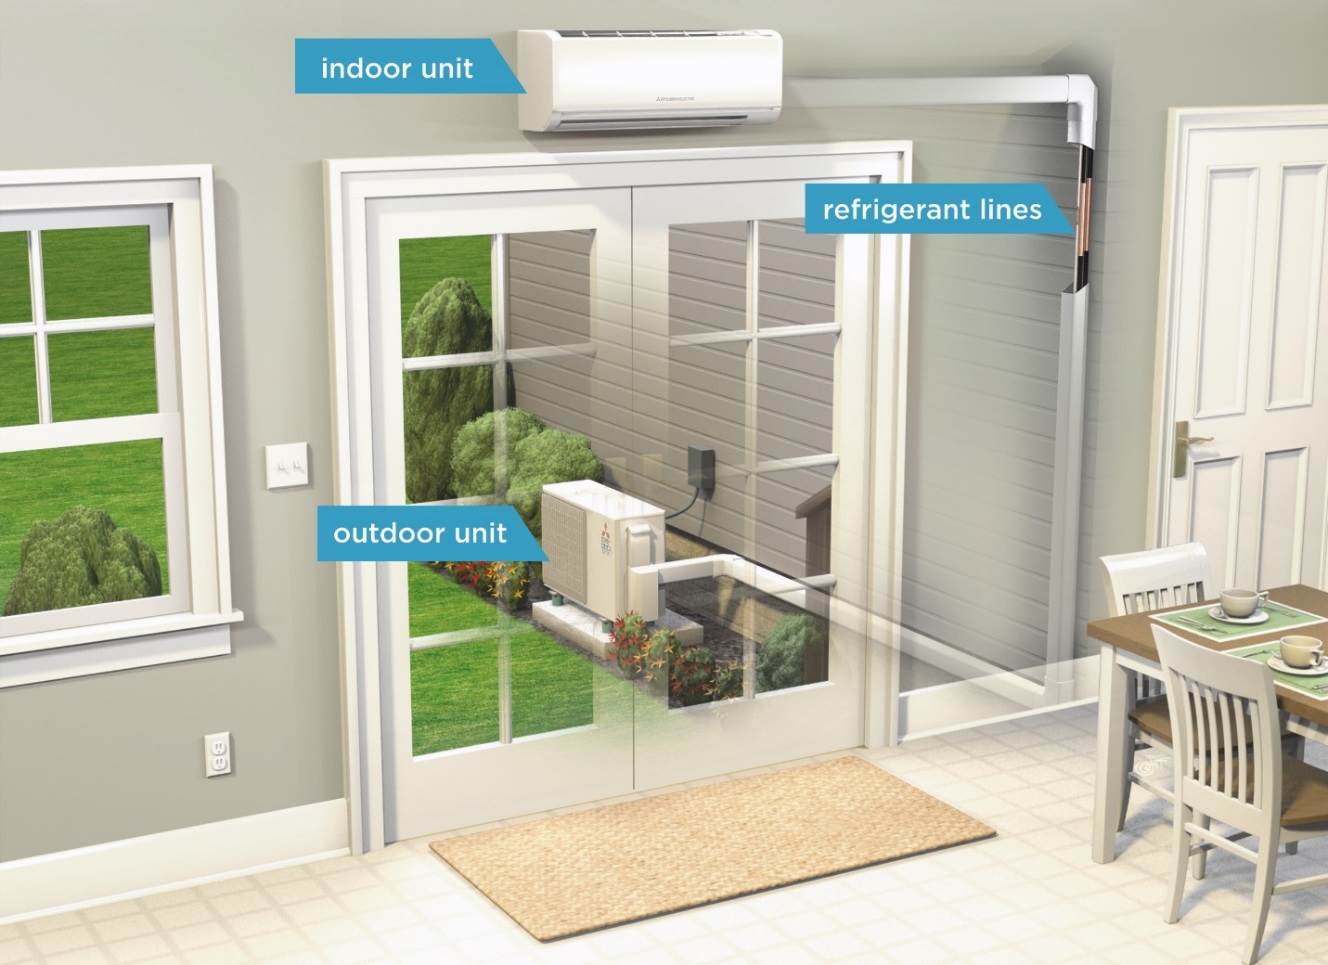 What is a Ductless Mini-Split System and How Does it Work?